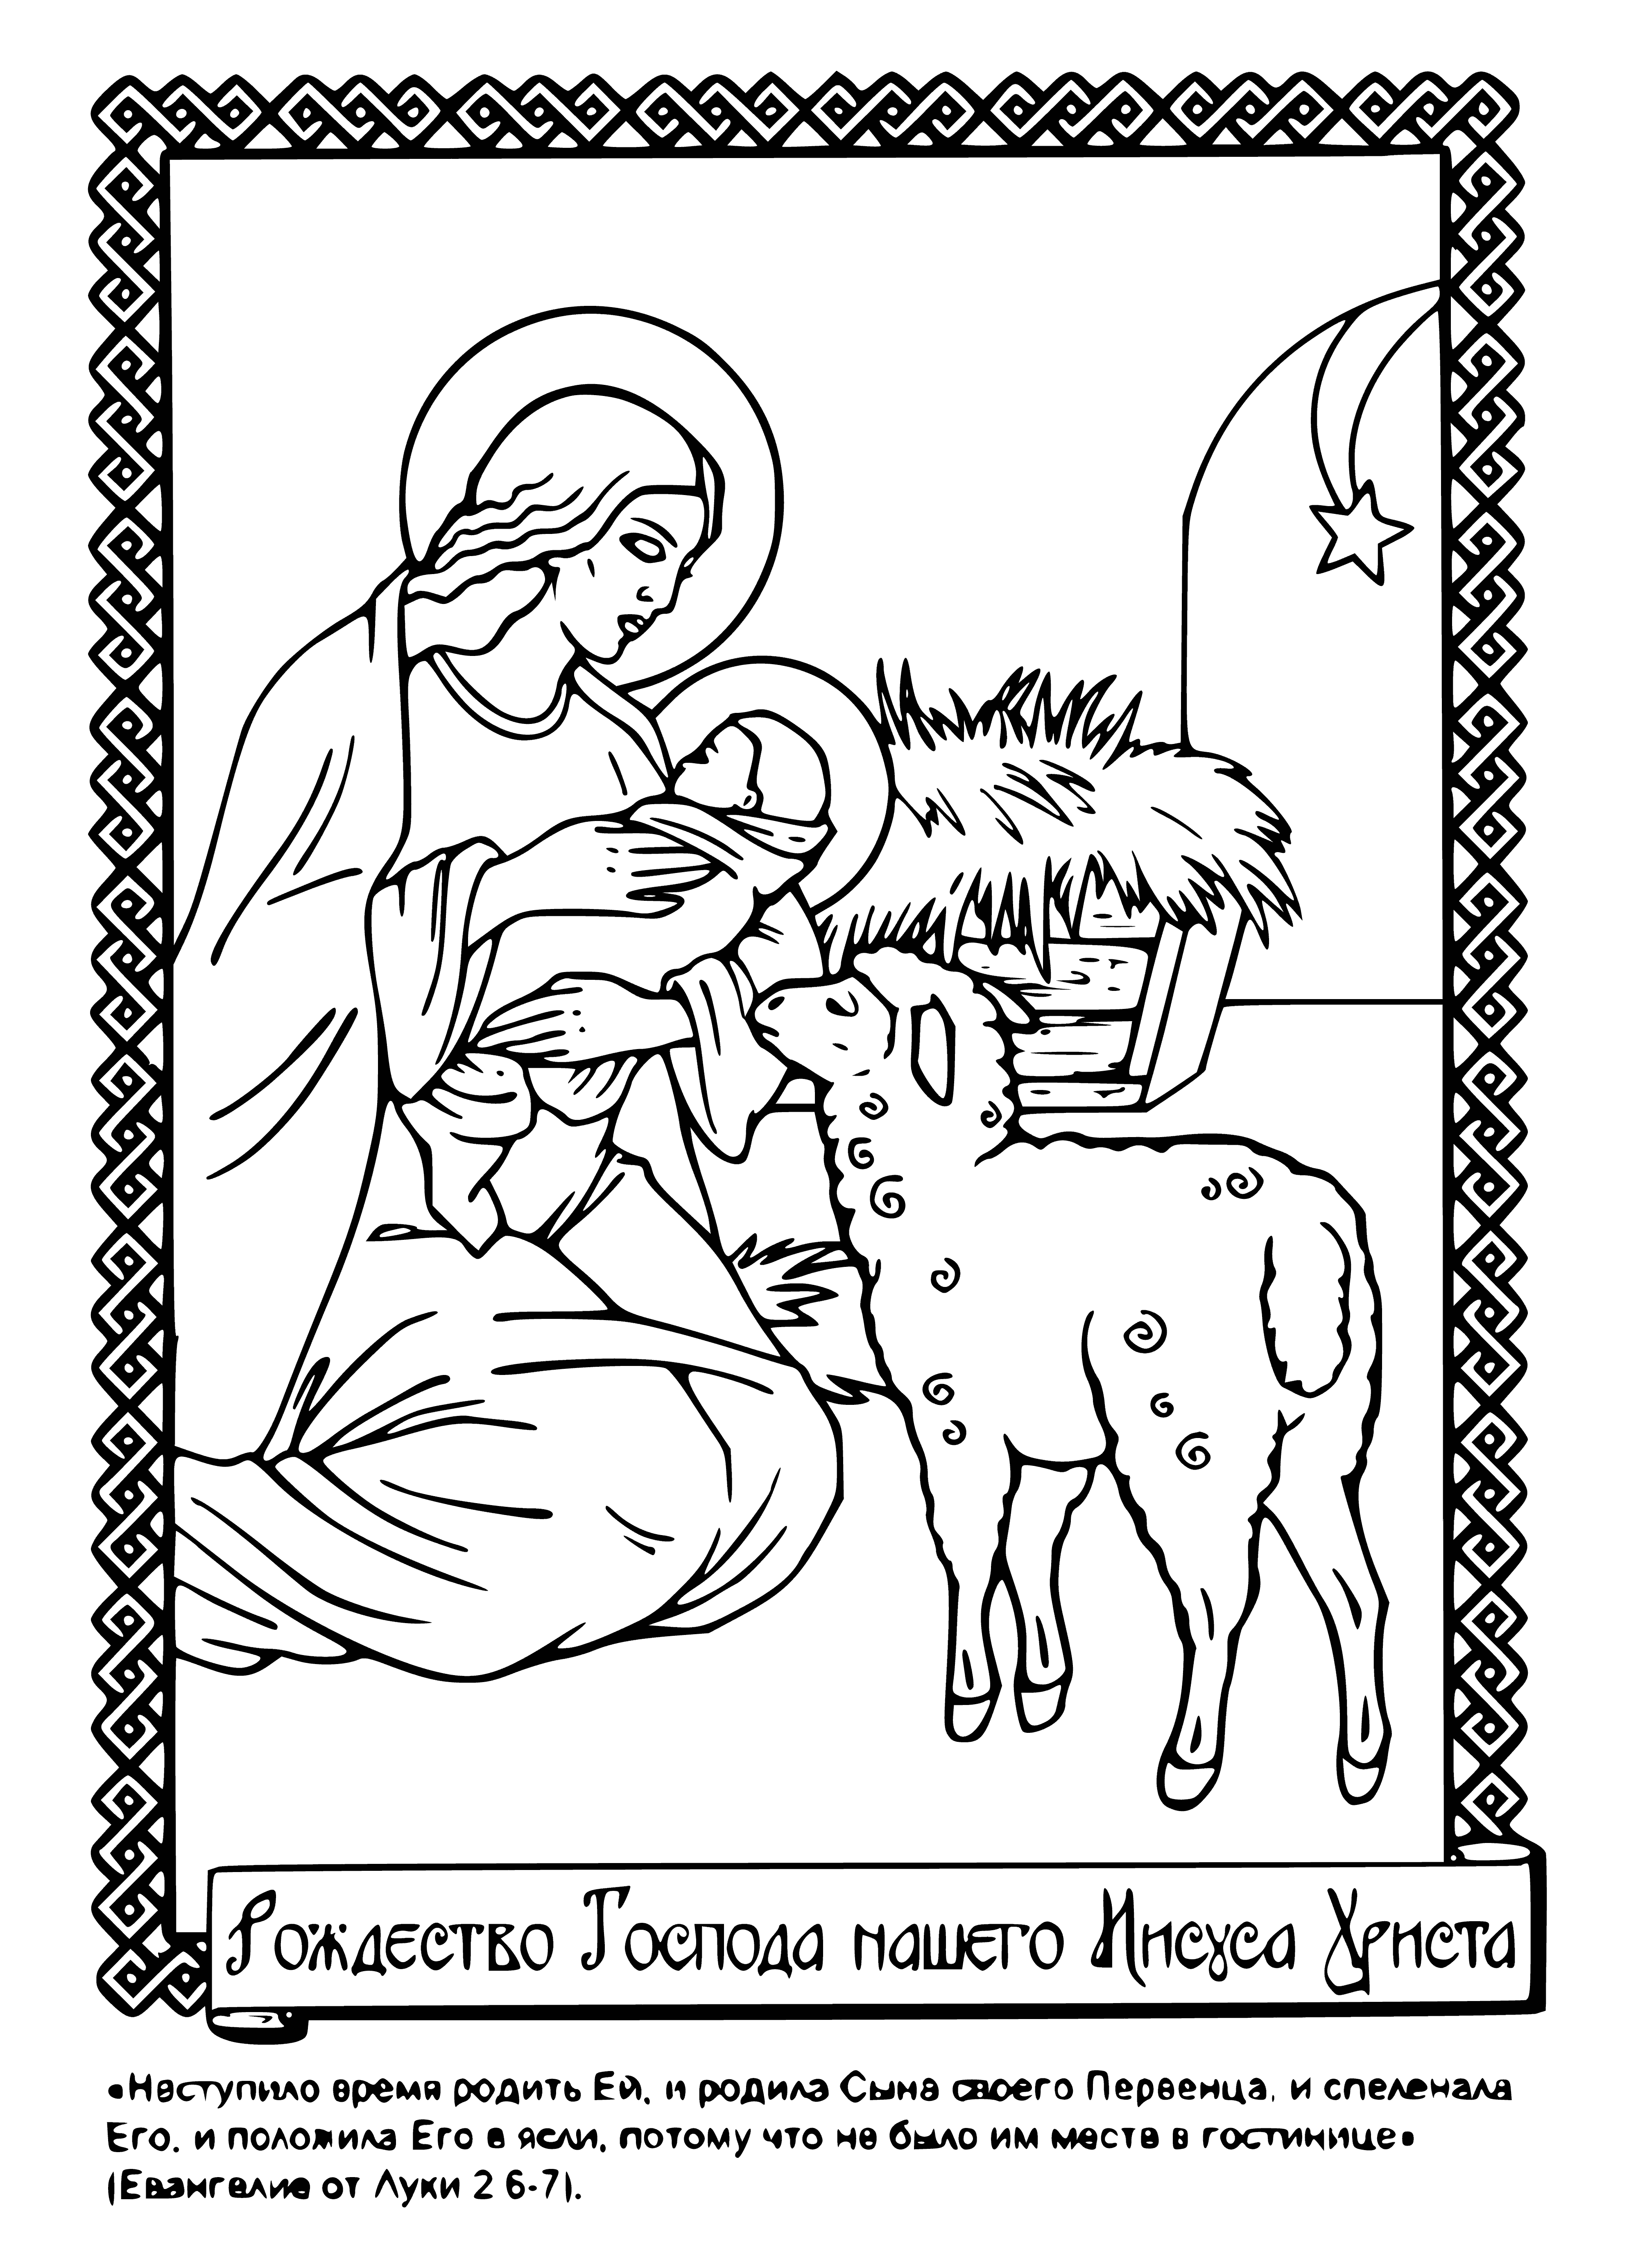 coloring page: 3 men in stable holding baby w/ halo, & star above. Symbolizing Jesus' birth.